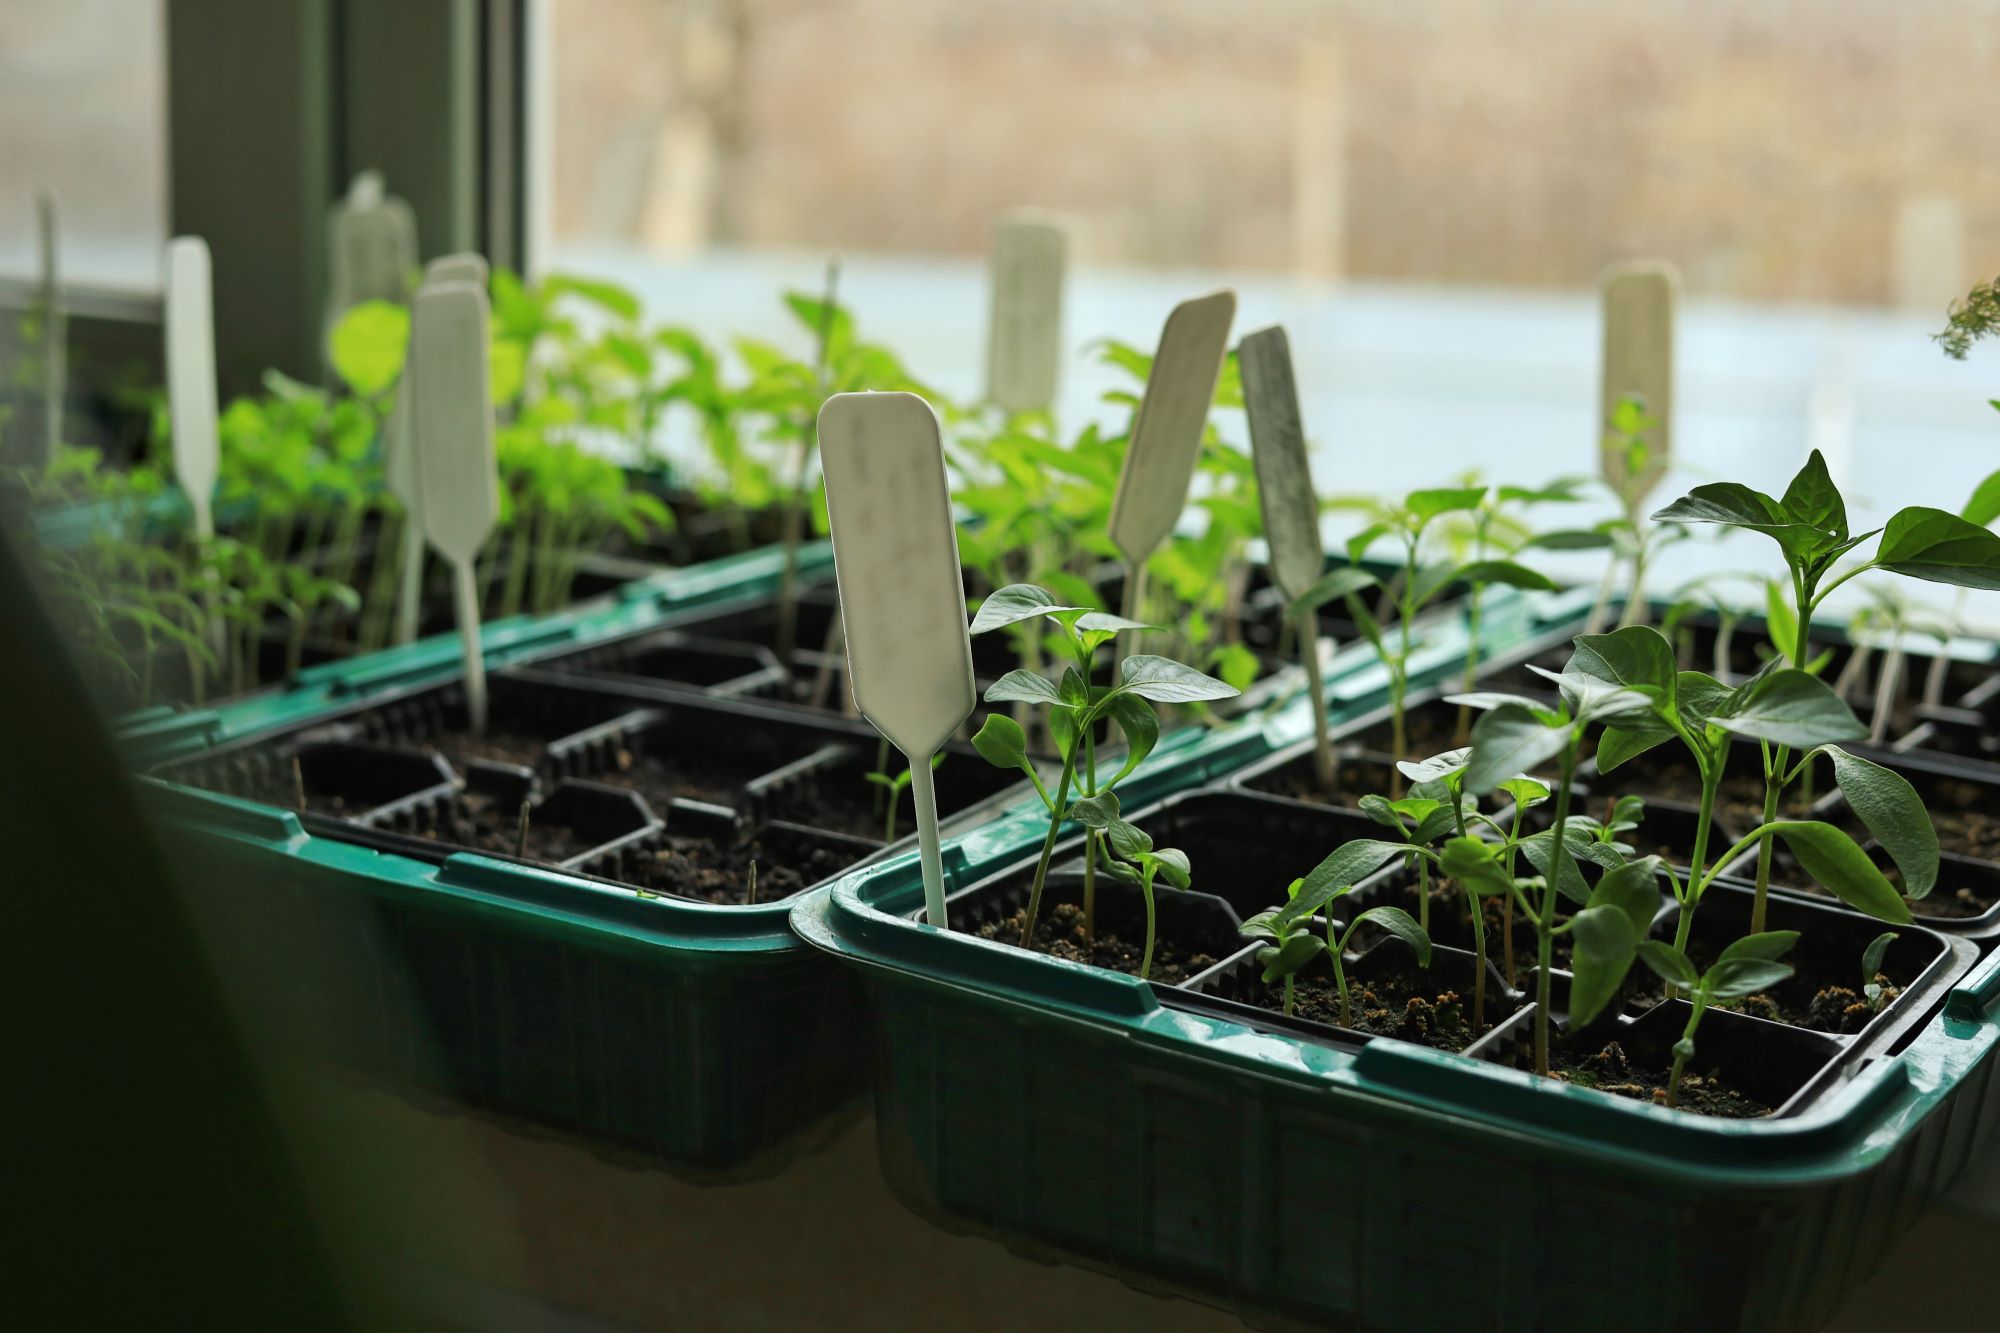 Ready, Set, Grow: End-of-Winter Tasks for a More Productive Garden